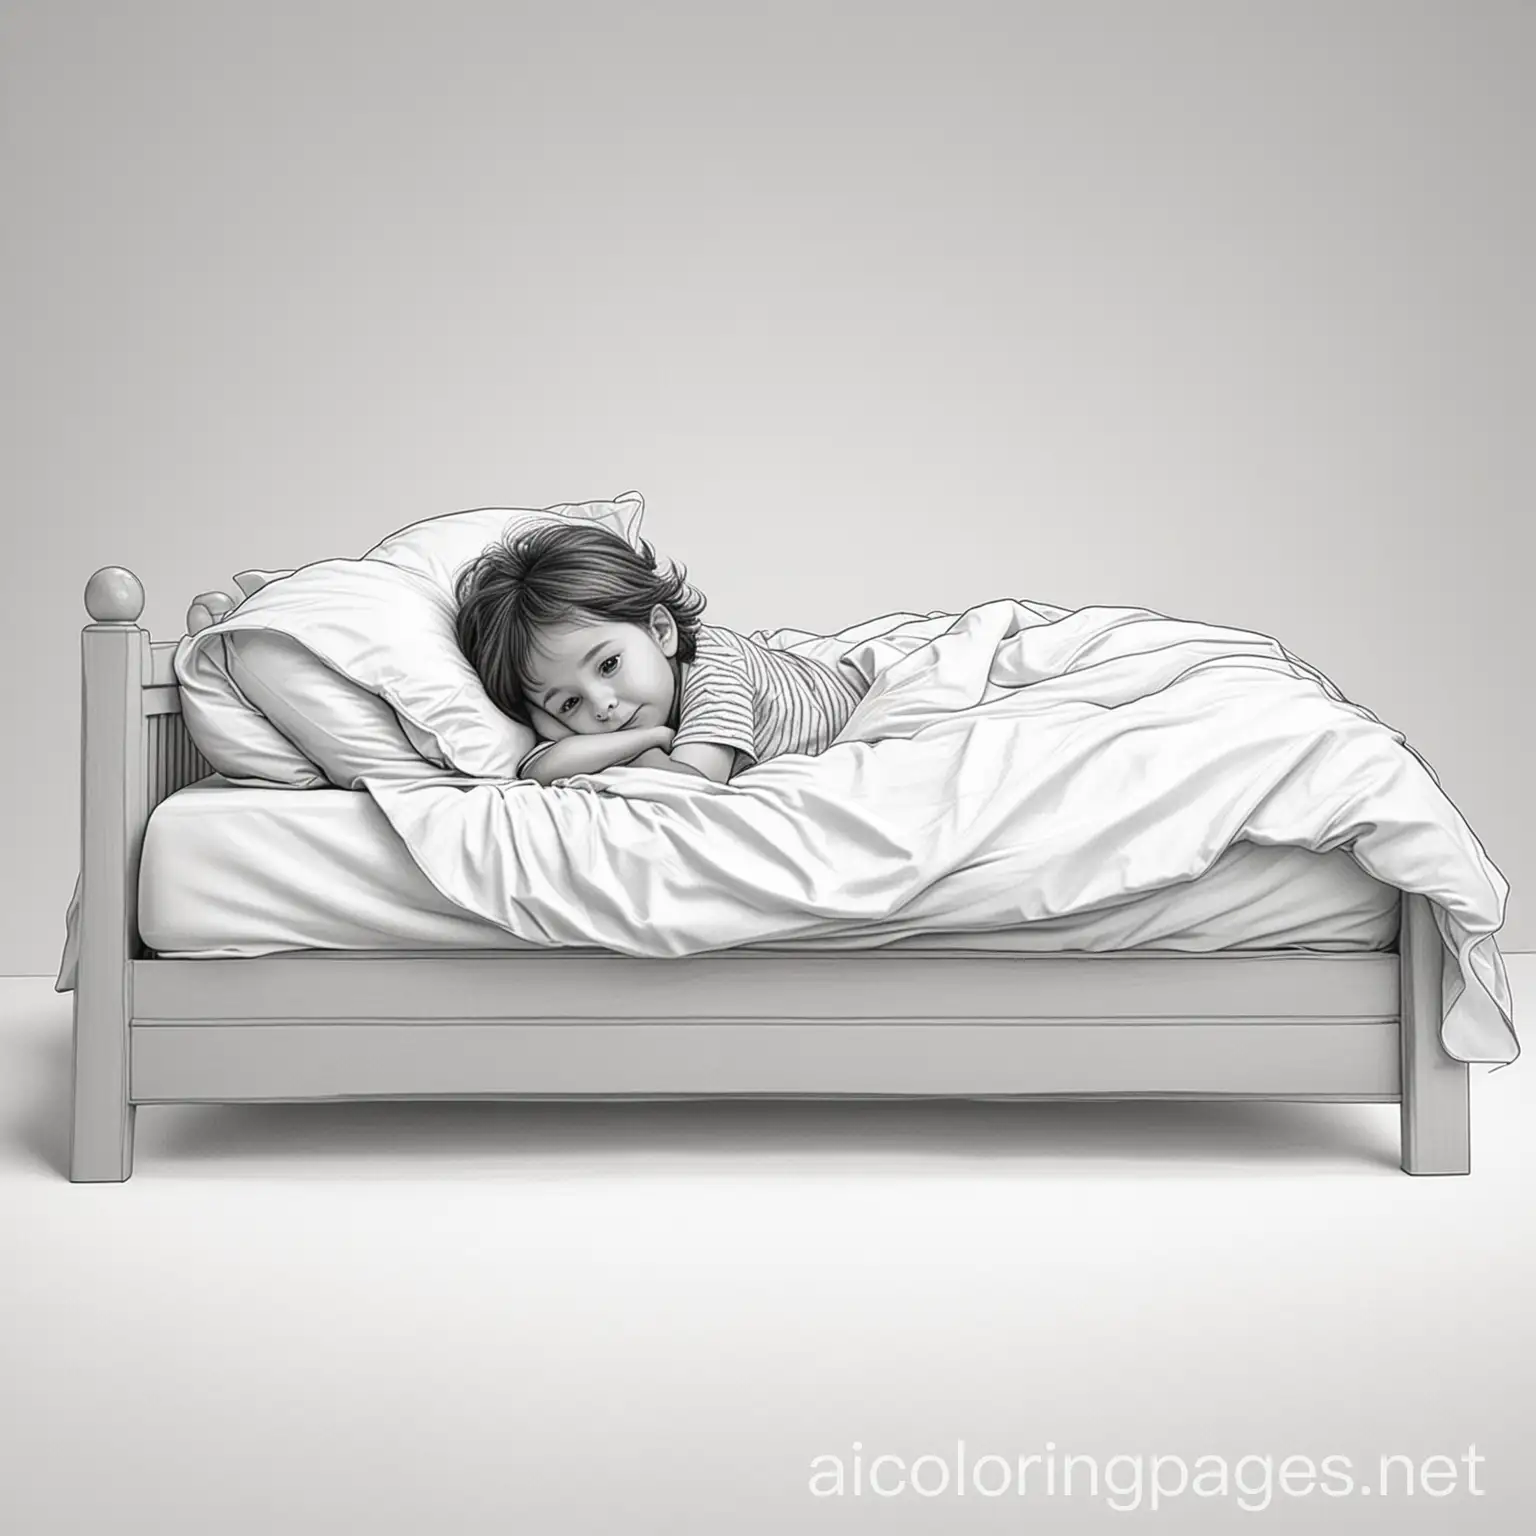 Child-Under-Covers-Line-Art-Coloring-Page